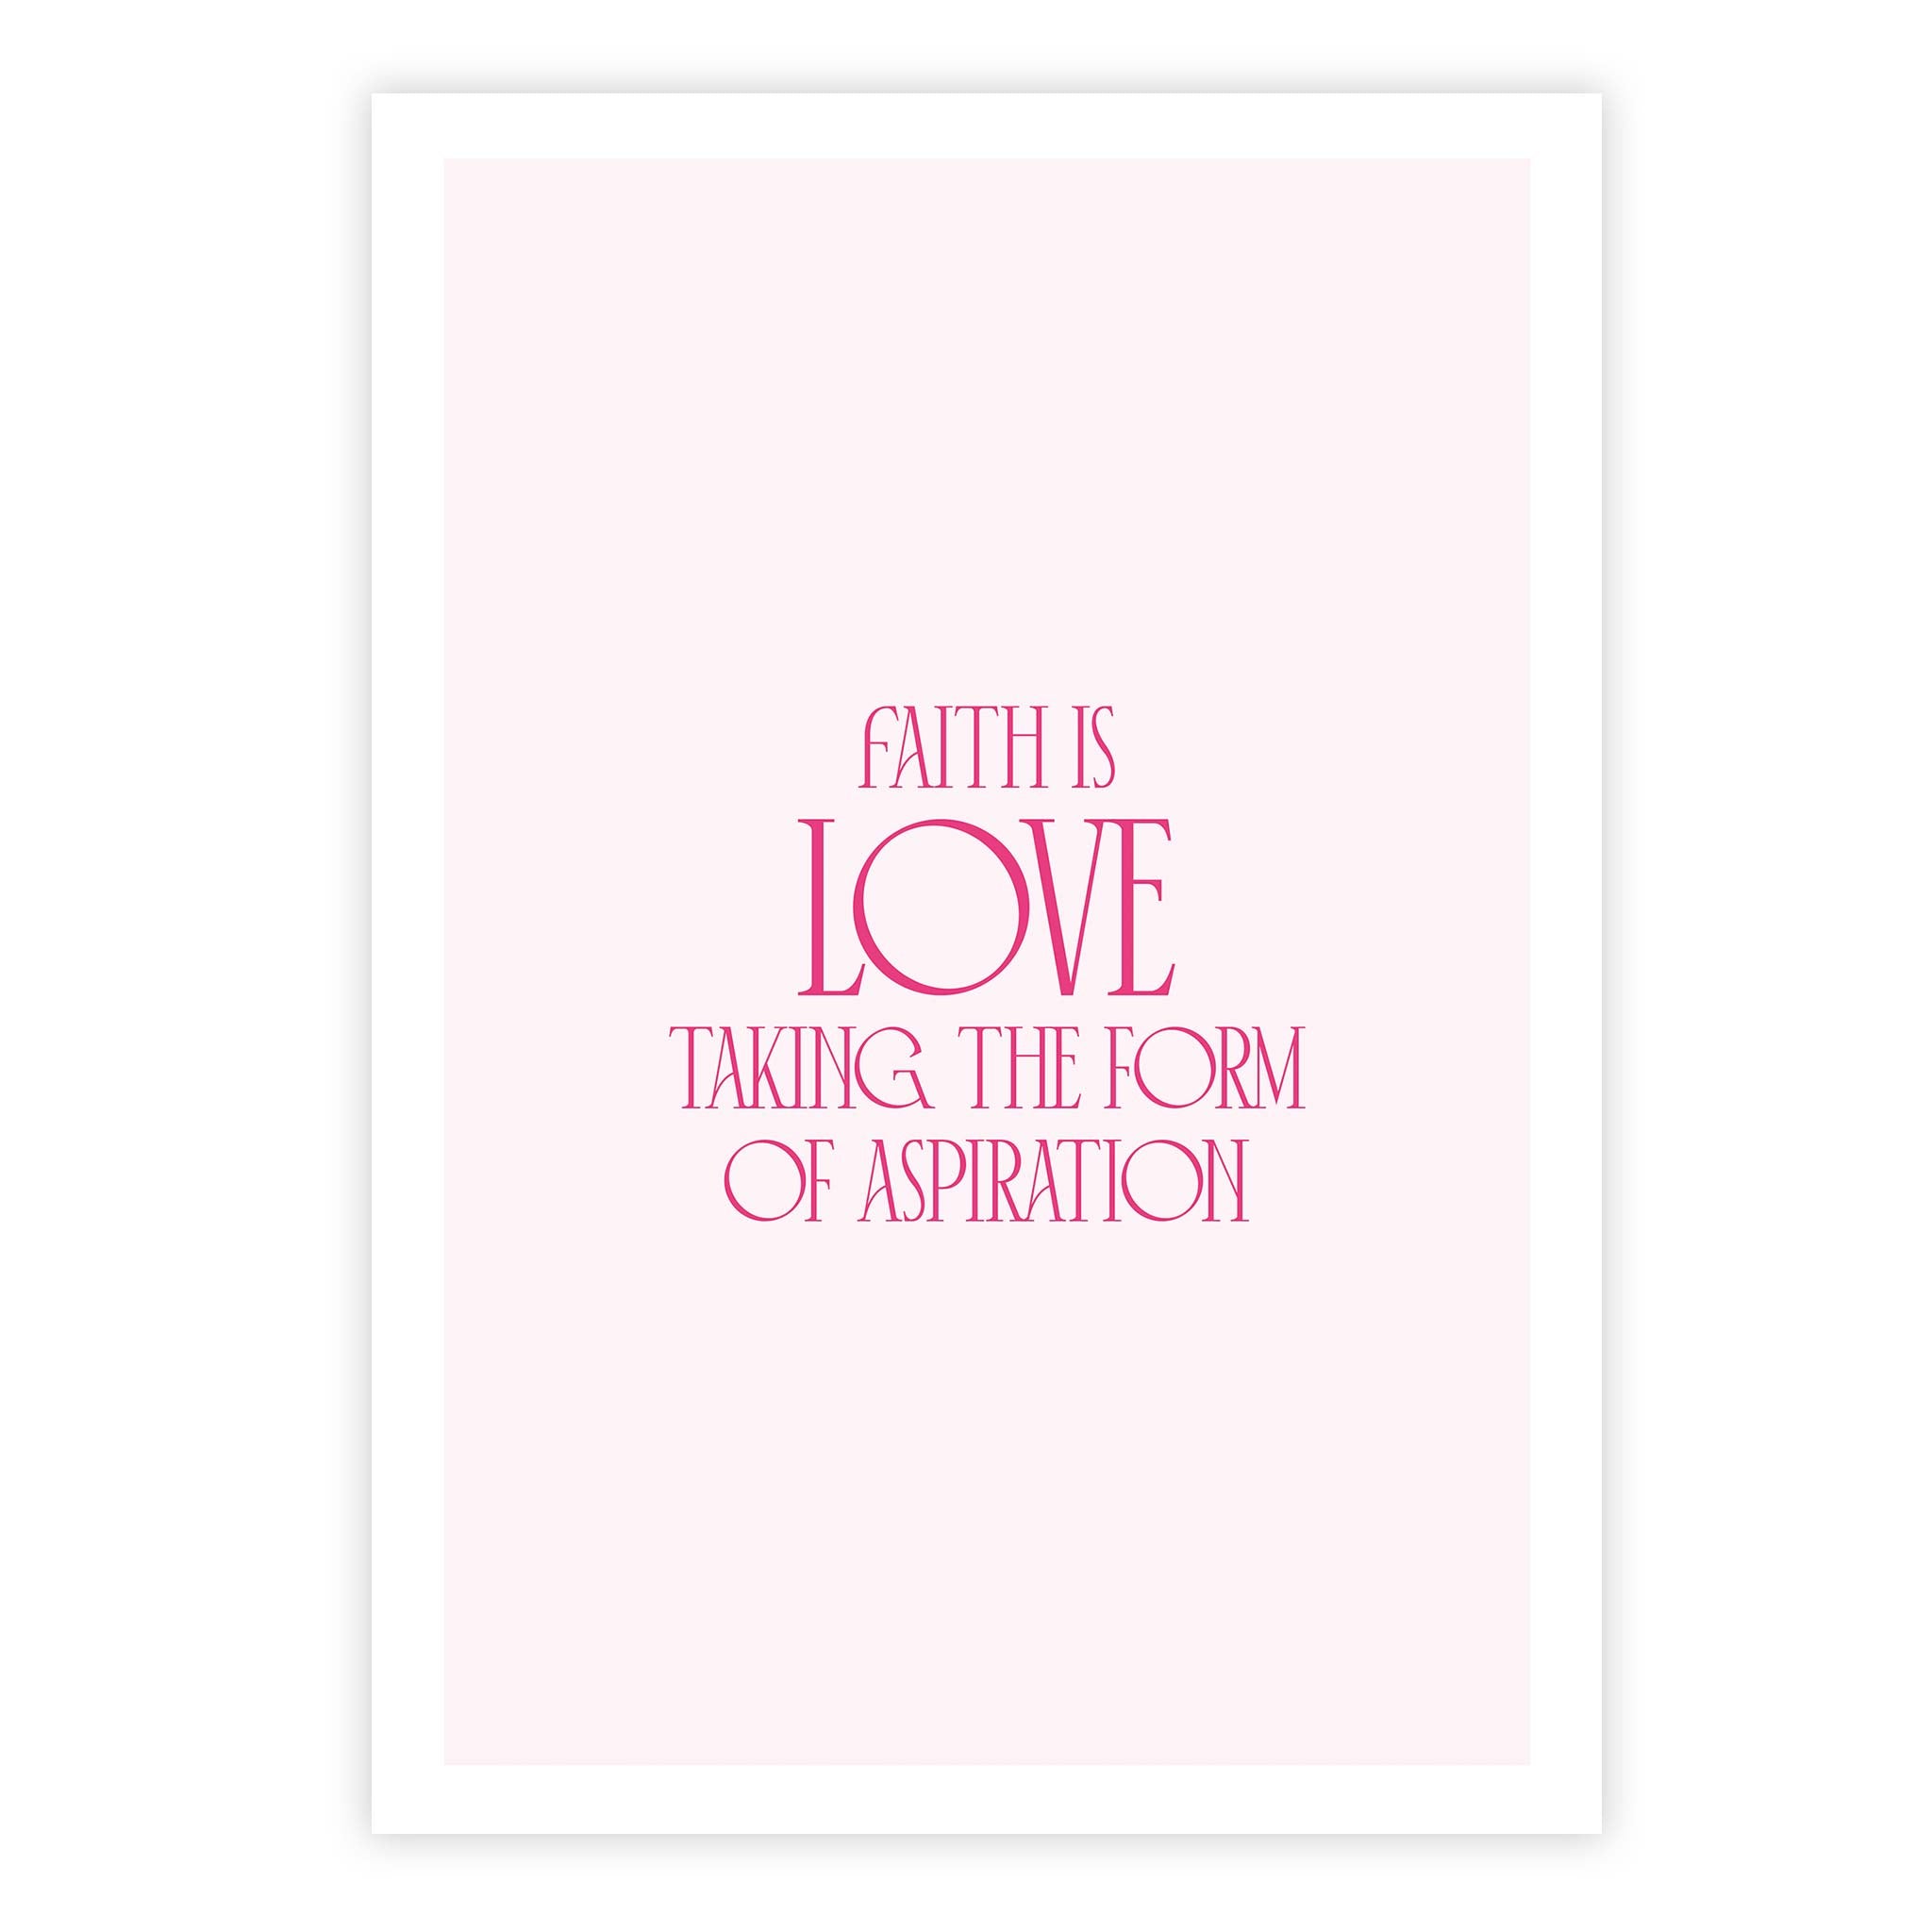 Faith is love taking the form of aspiration